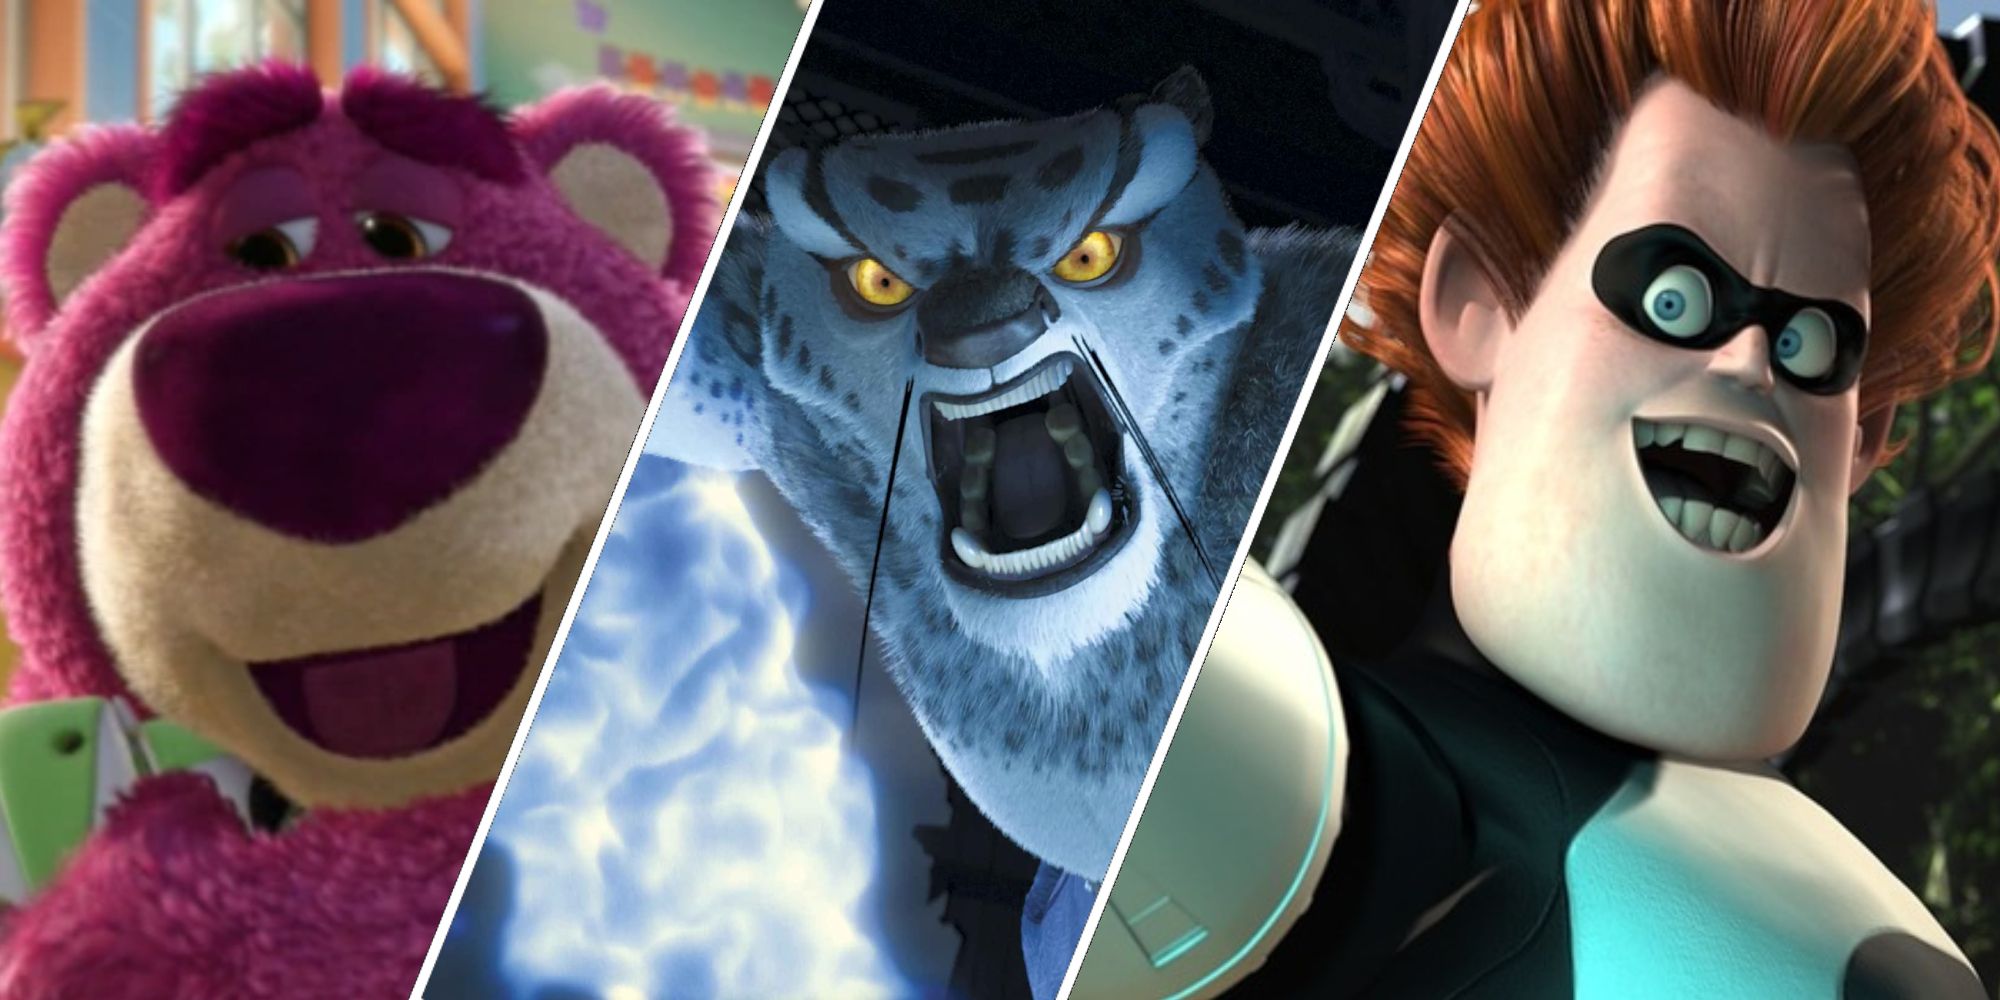 6 Disney Characters DreamWorks Turned into VILLAINS 